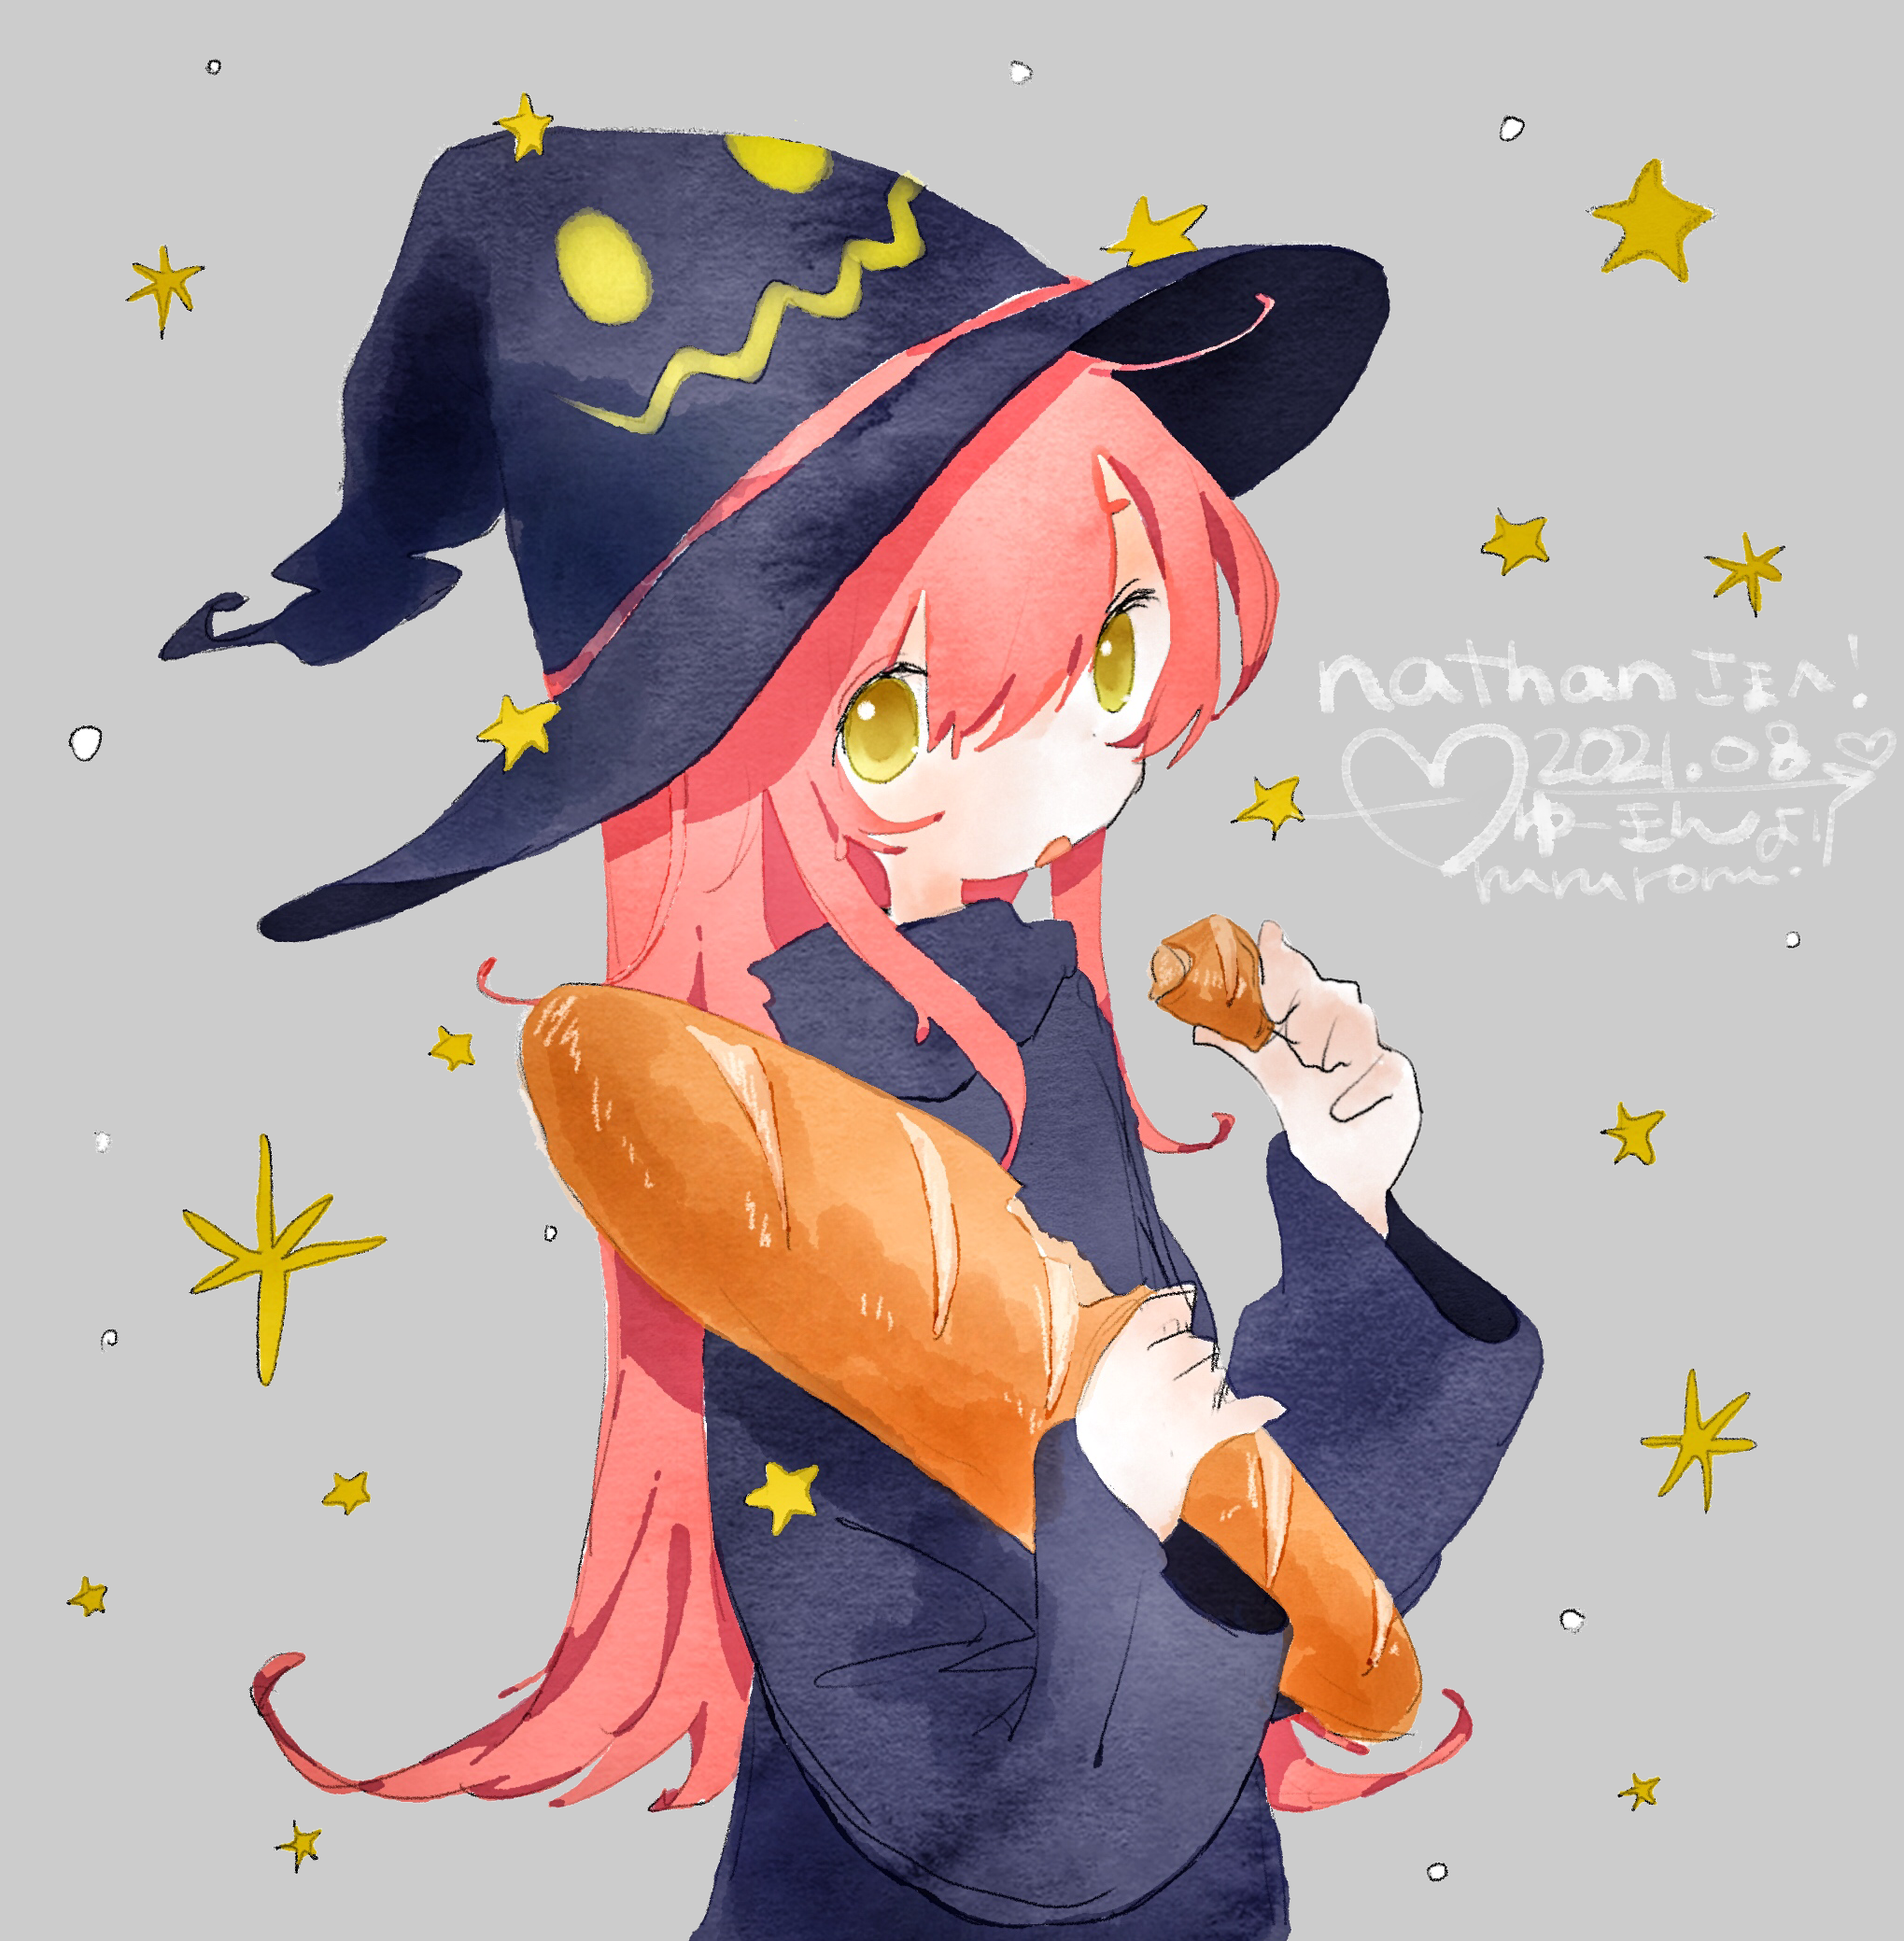 a girl with pink hair and yellow eyes wearing an oversized black dress and a black hat with a jack o'lantern face on it. she is holding a baguette and eating a piece of it. there are stars behind her.